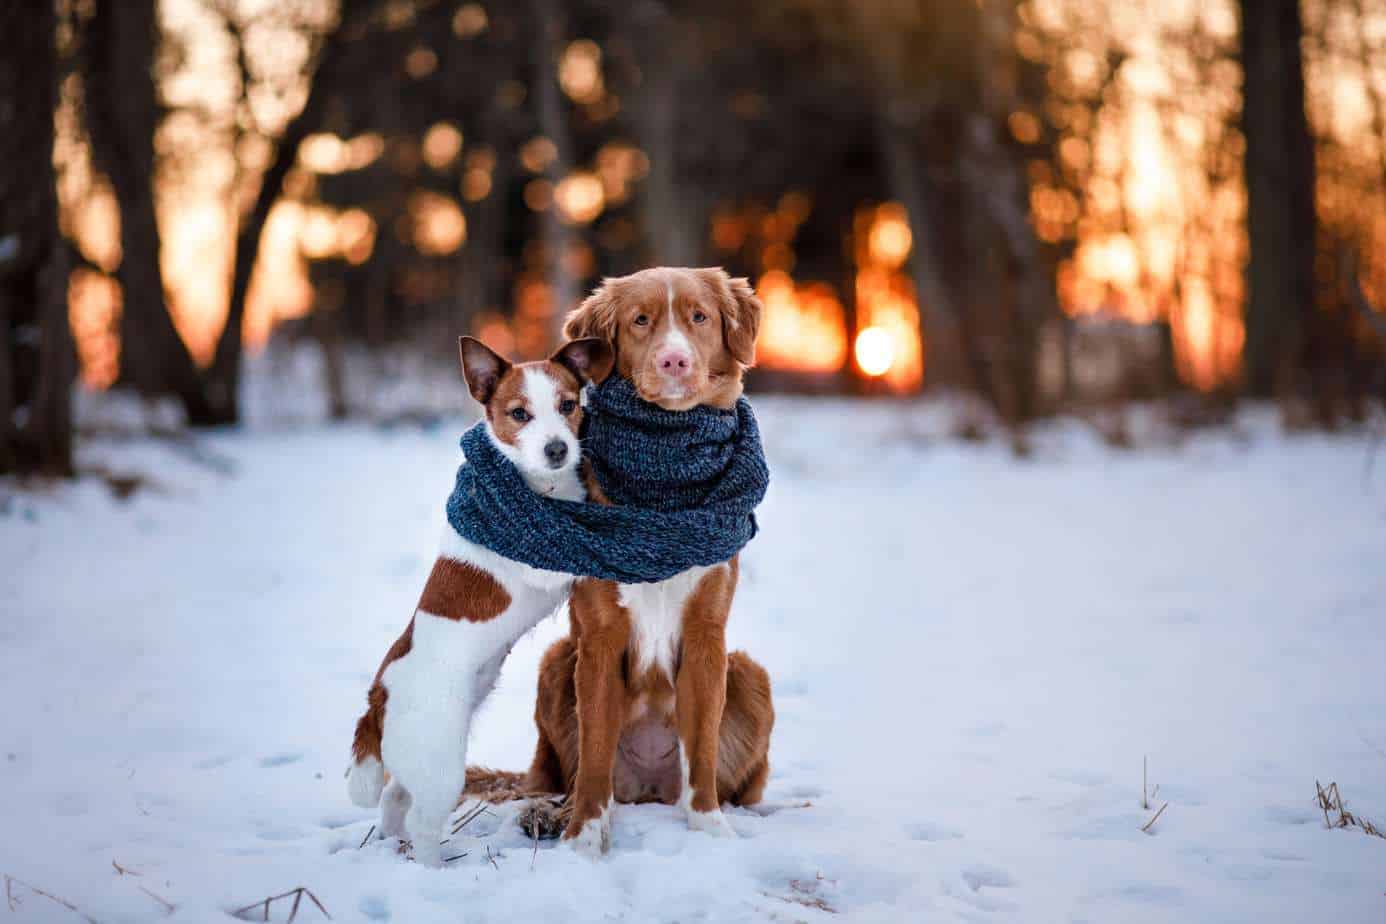 A pair of dogs snuggle together on snowy field. Use our dog winter safety guide to keep your dog safe.